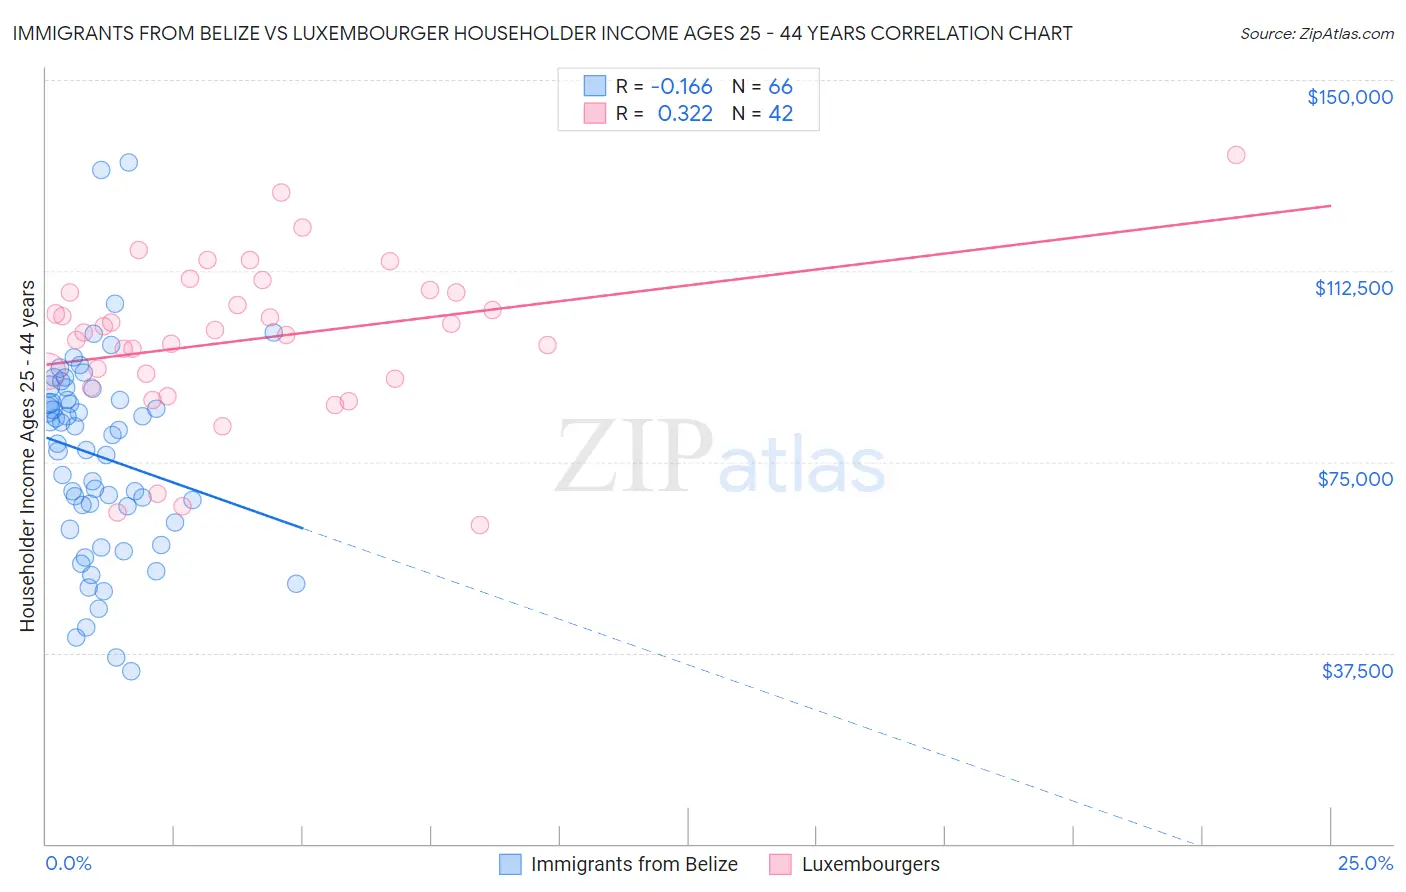 Immigrants from Belize vs Luxembourger Householder Income Ages 25 - 44 years